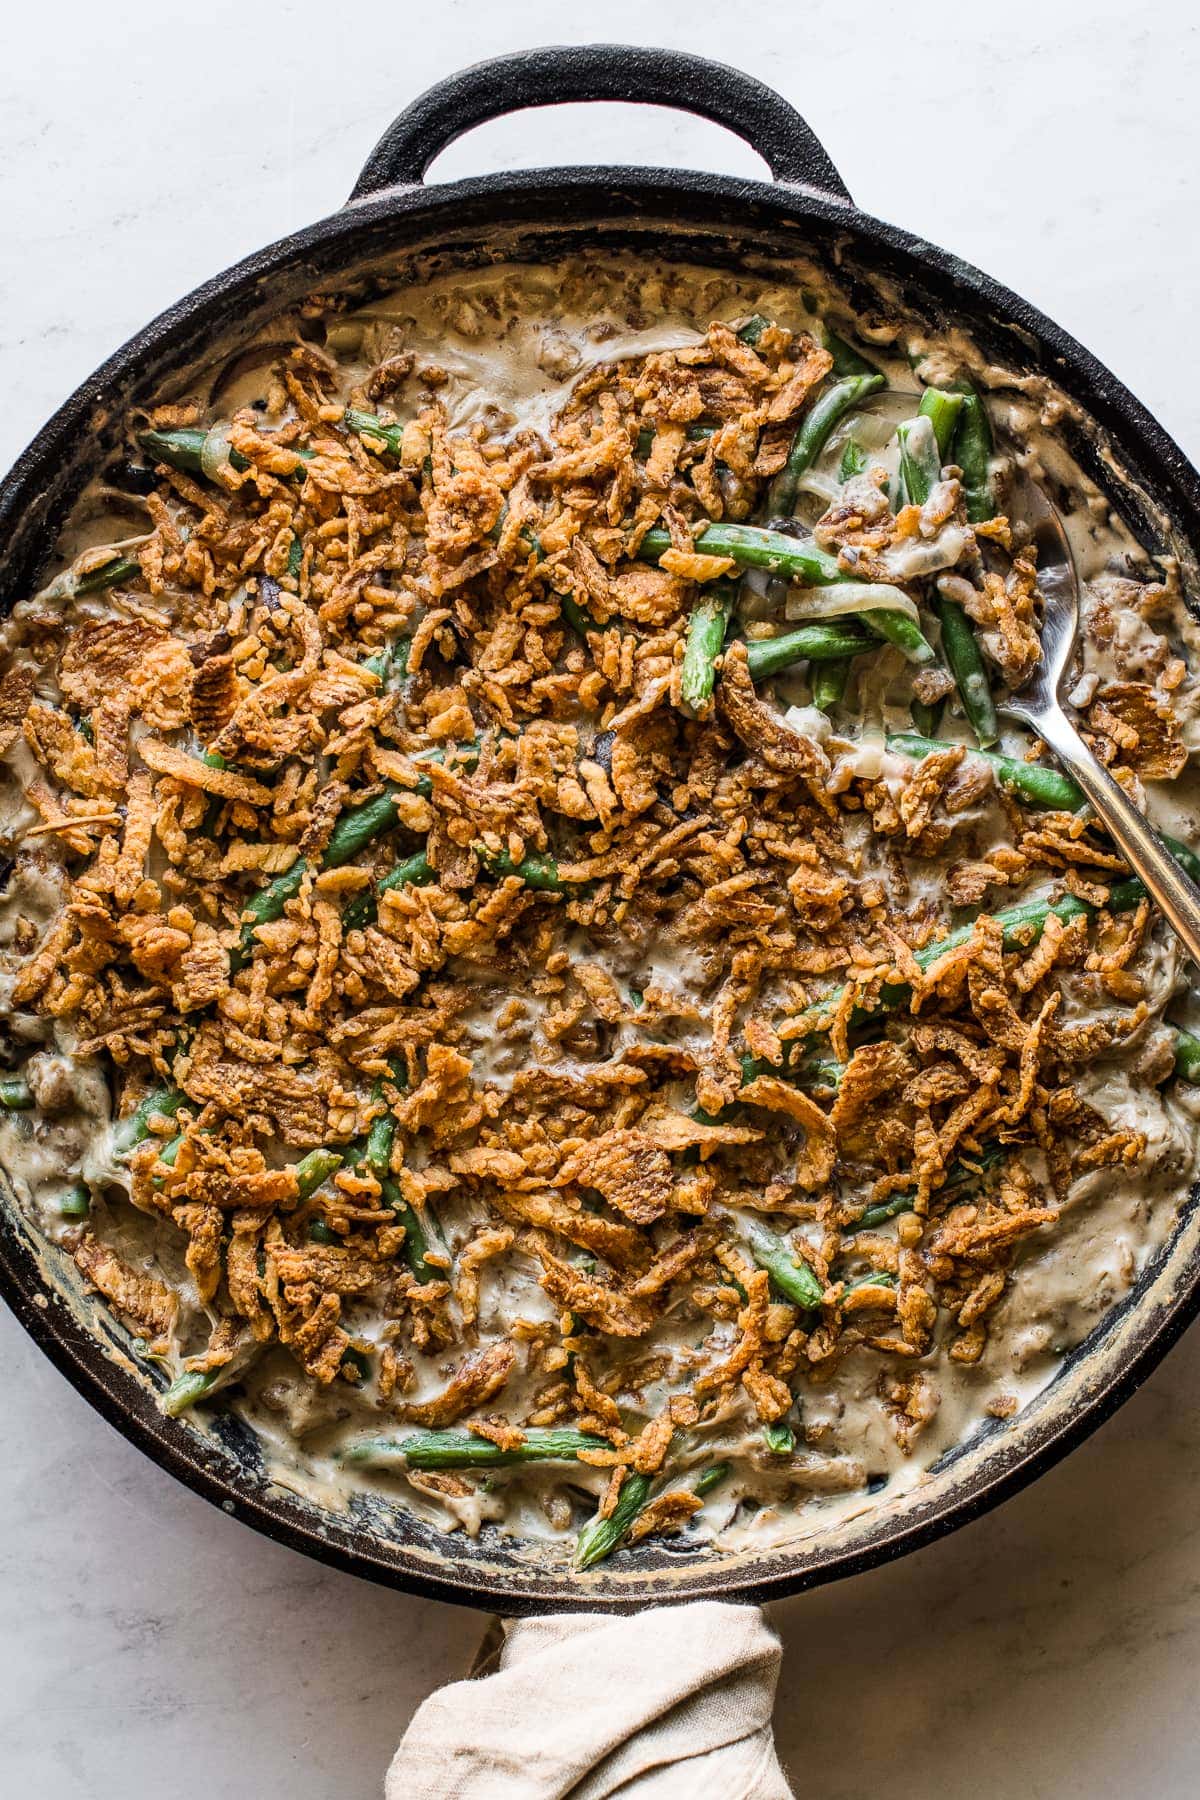 Green bean casserole recipe topped with fried onions and made with fresh green beans.